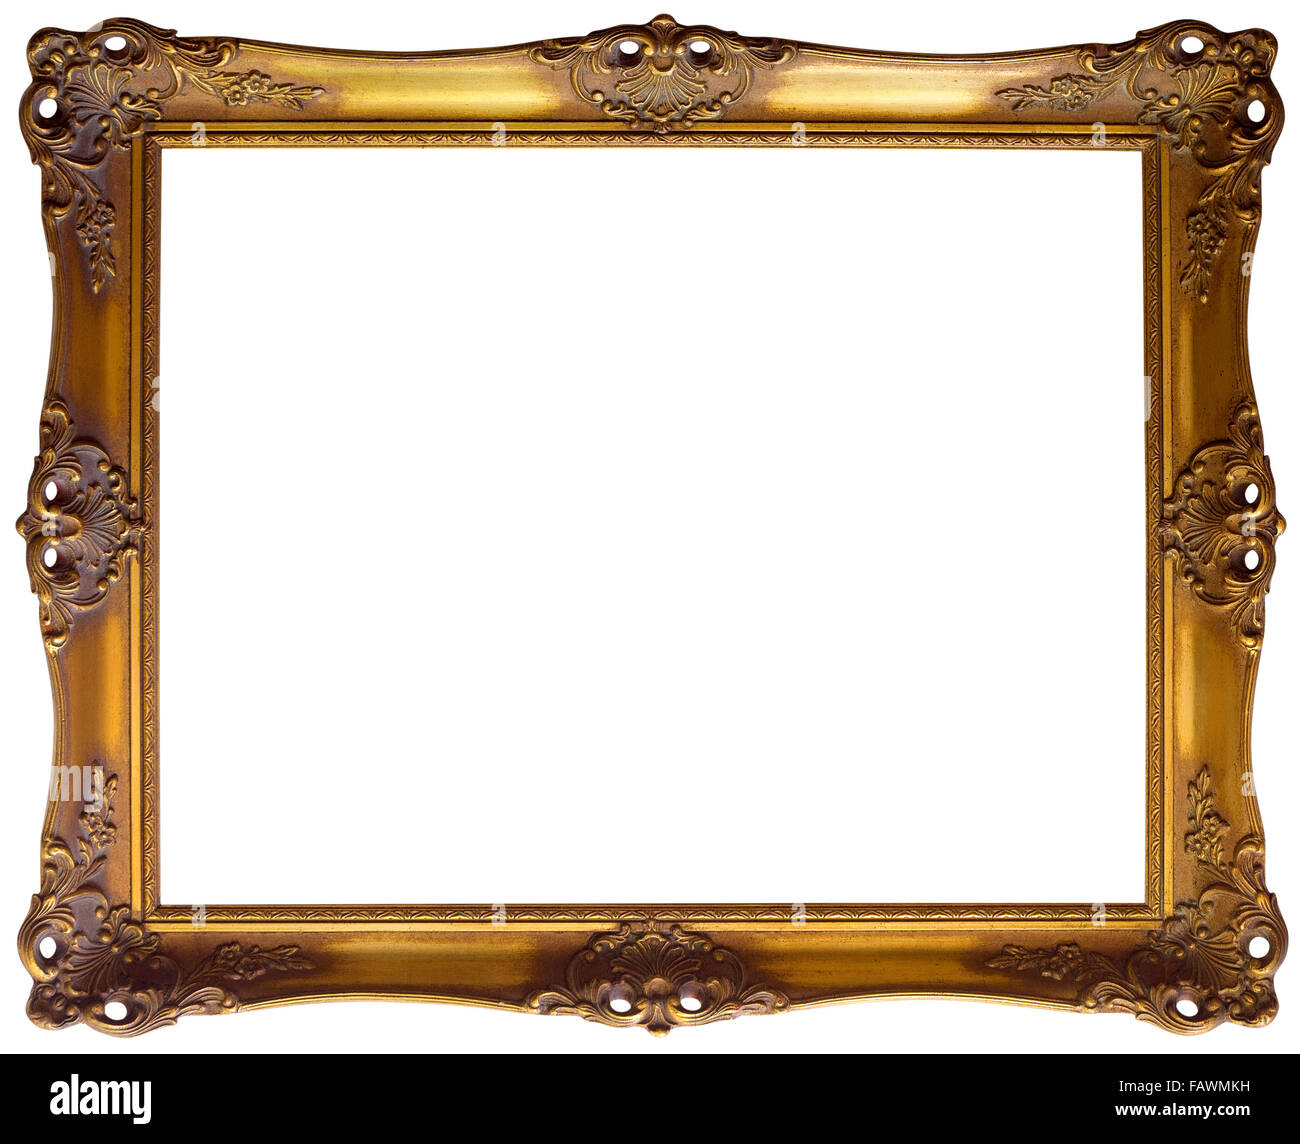 Ornate Golden Baroque Frame Clipping Path Stock Photo